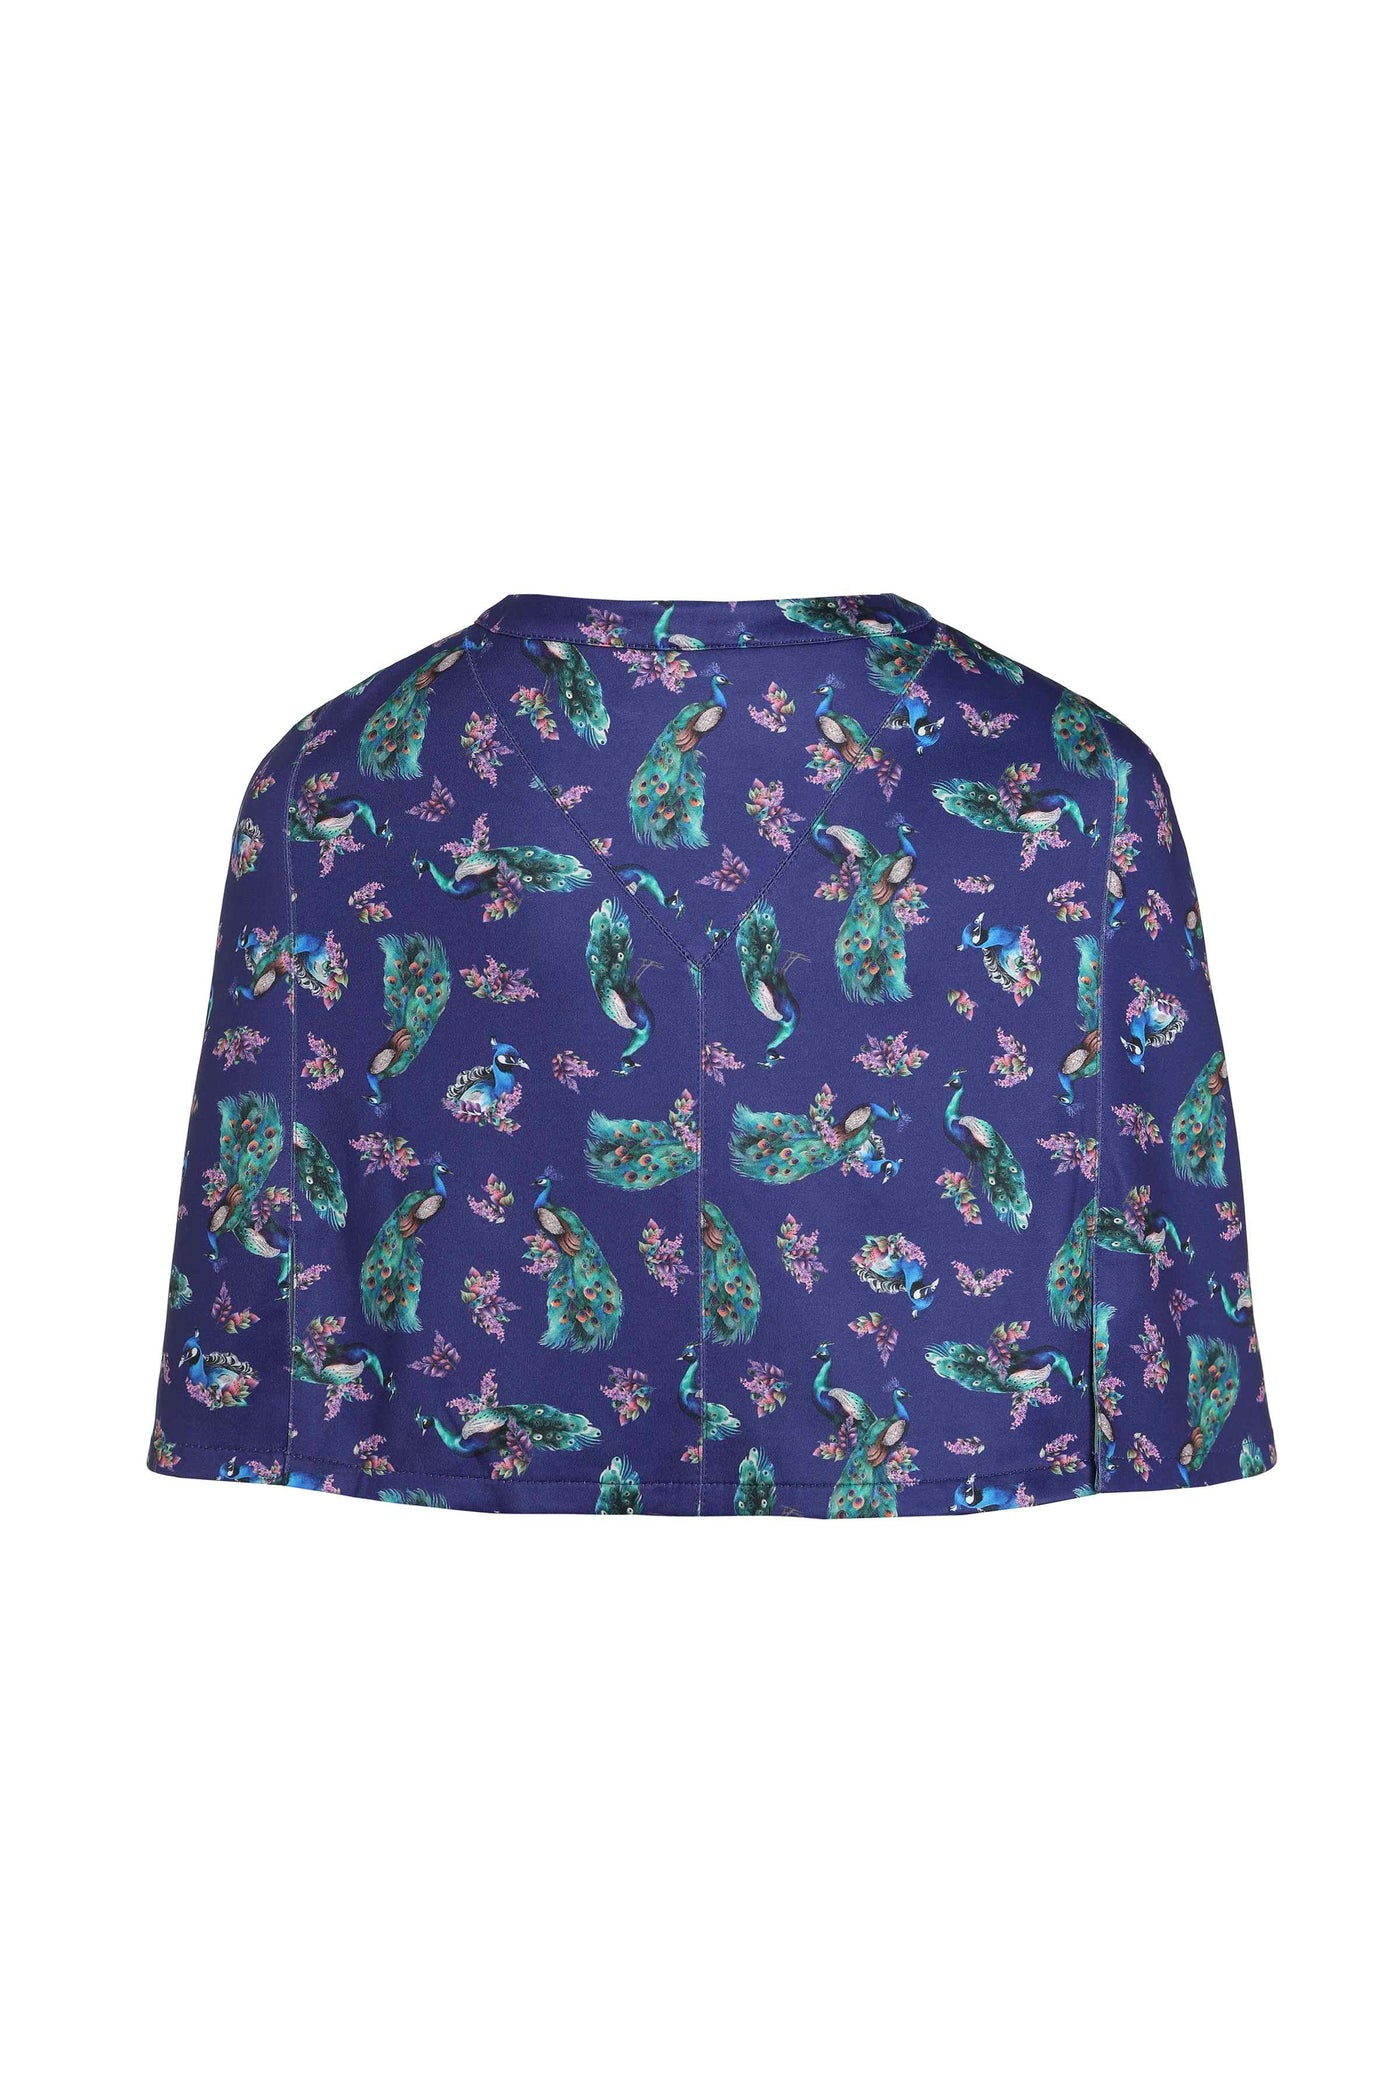 Back View of Purple Peacock Bow Neck Coat